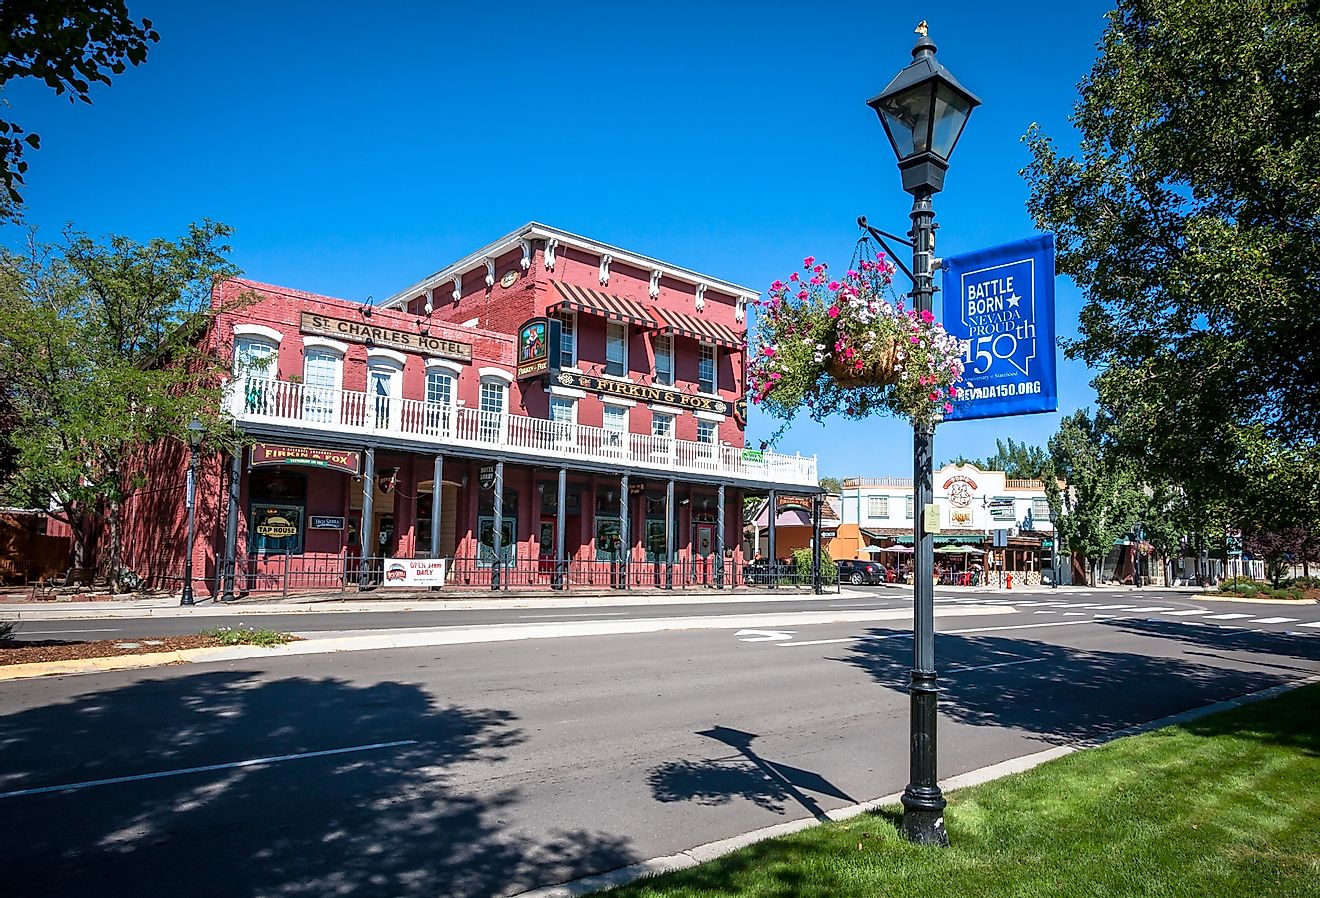 Historic downtown photographed on August 24, 2014 in Carson City, Nevada. Image credit Aneta Waberska via Shutterstock